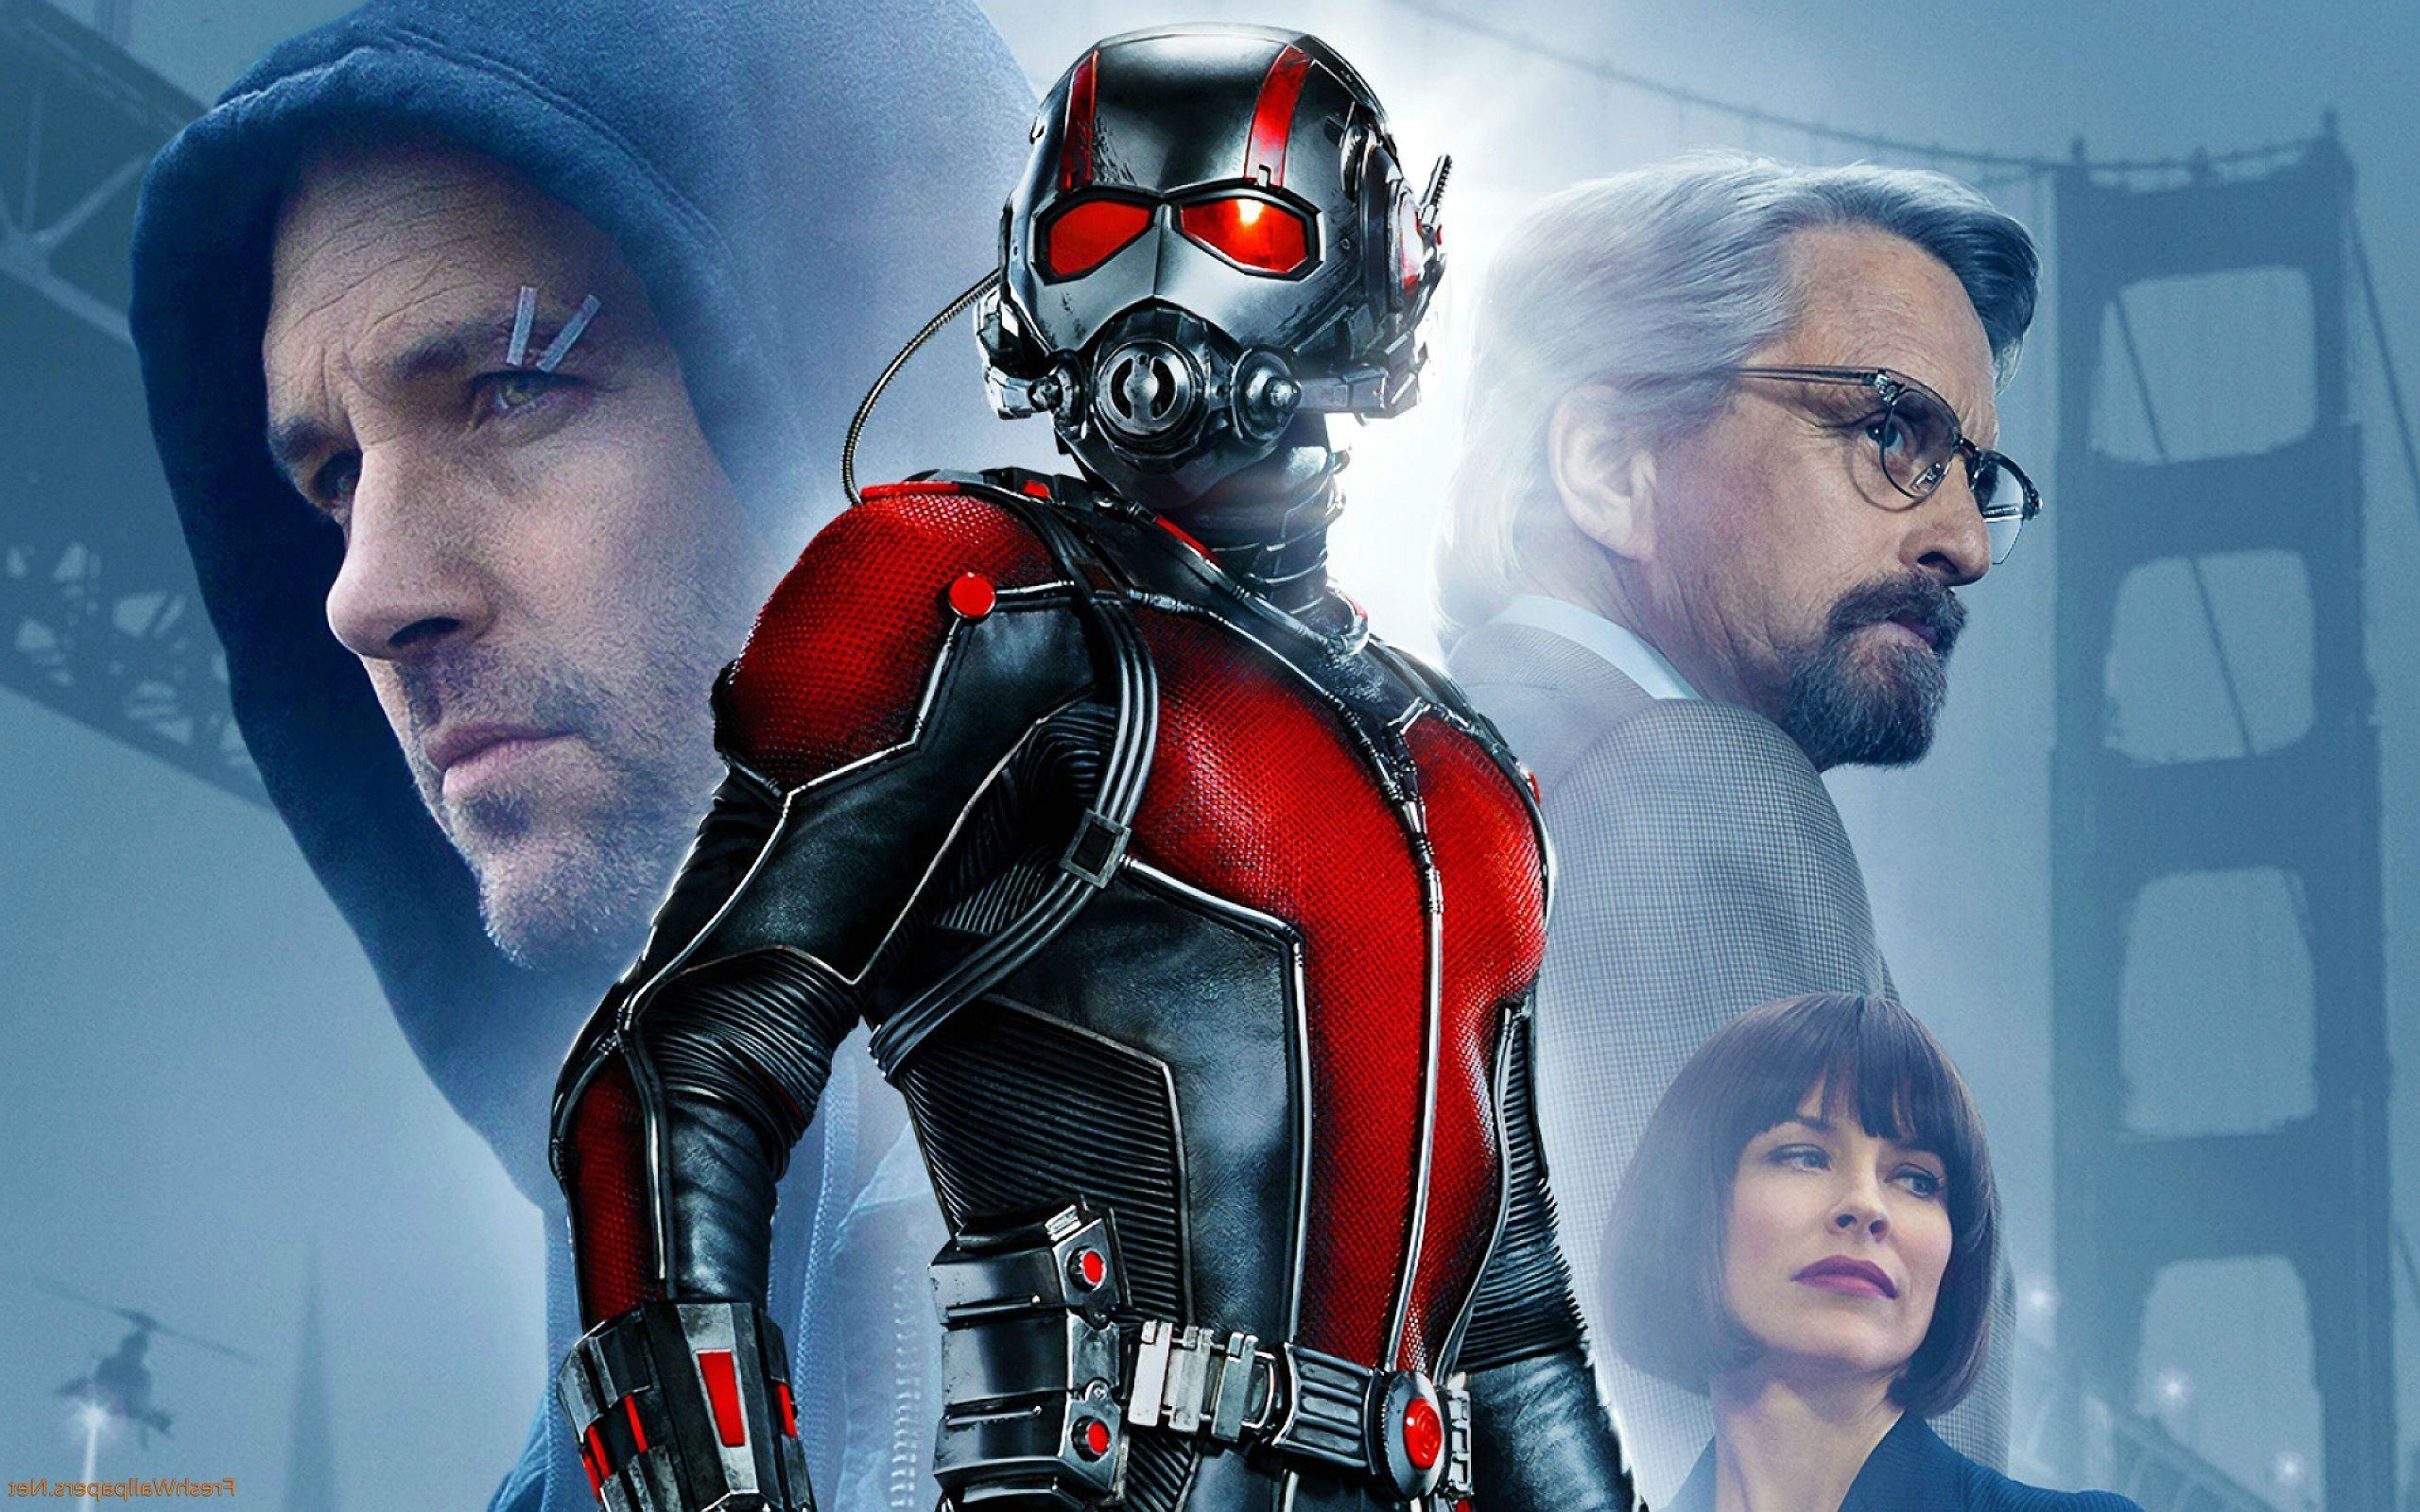 Ant-Man movie wallpapers, HD backgrounds, Marvel films, Movie posters, 2560x1600 HD Desktop